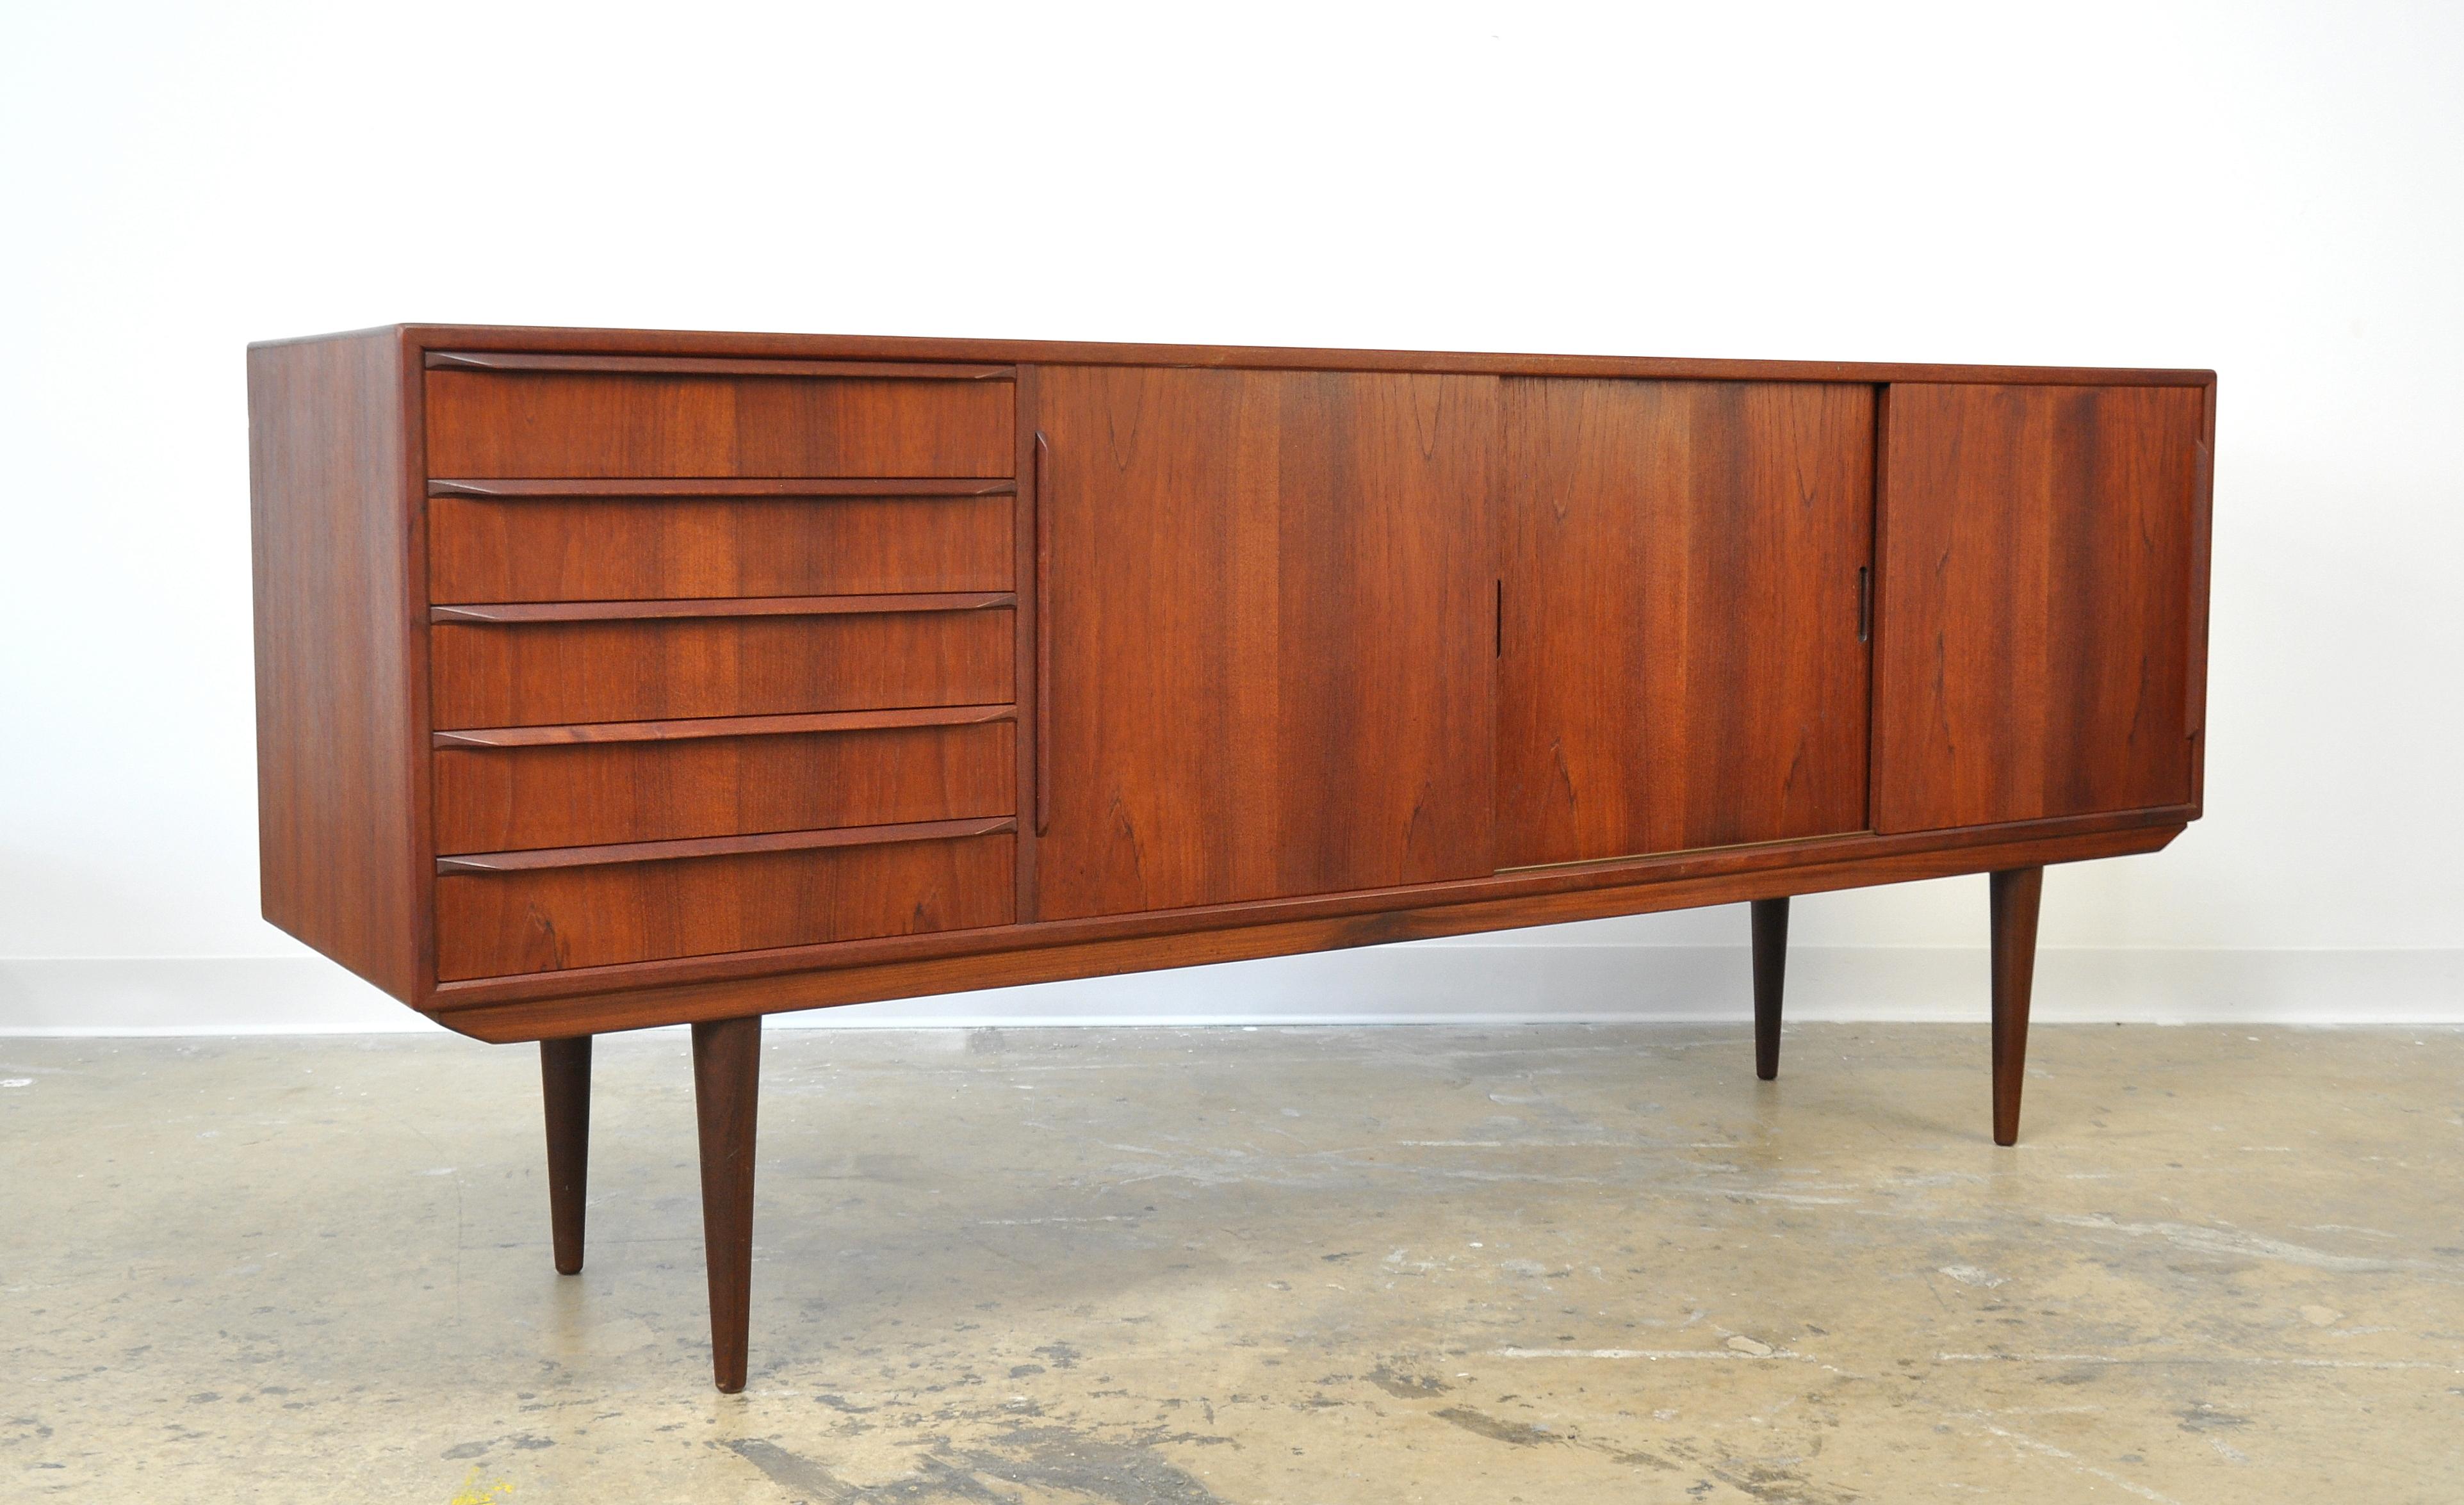 Midcentury vintage Danish modern four-bay sideboard or bar cabinet designed by Erling Torvits, dating from the 1960s. This stunning buffet features a striking silhouette with long, slender and elegantly tapered legs. Five drawers with maple interior